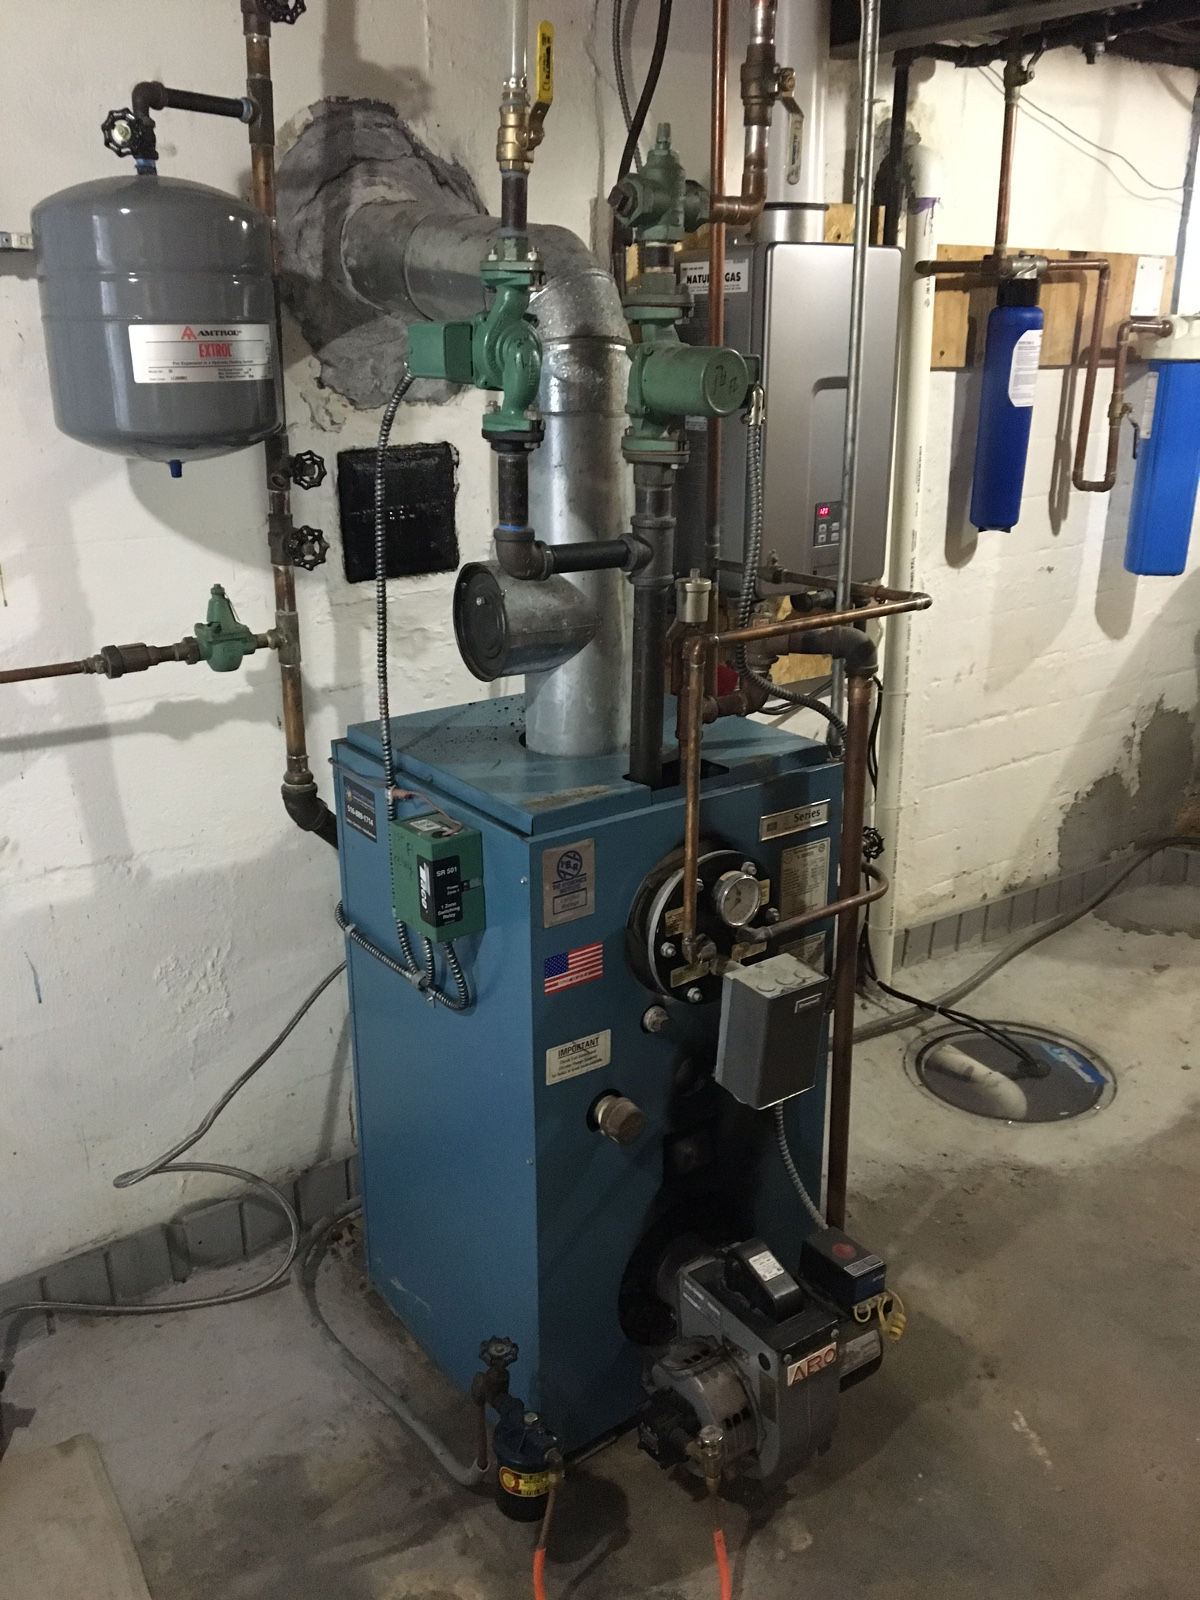 OIL TO GAS CONVERSION Oceanside NY Woodmere NY Rockville Centre 